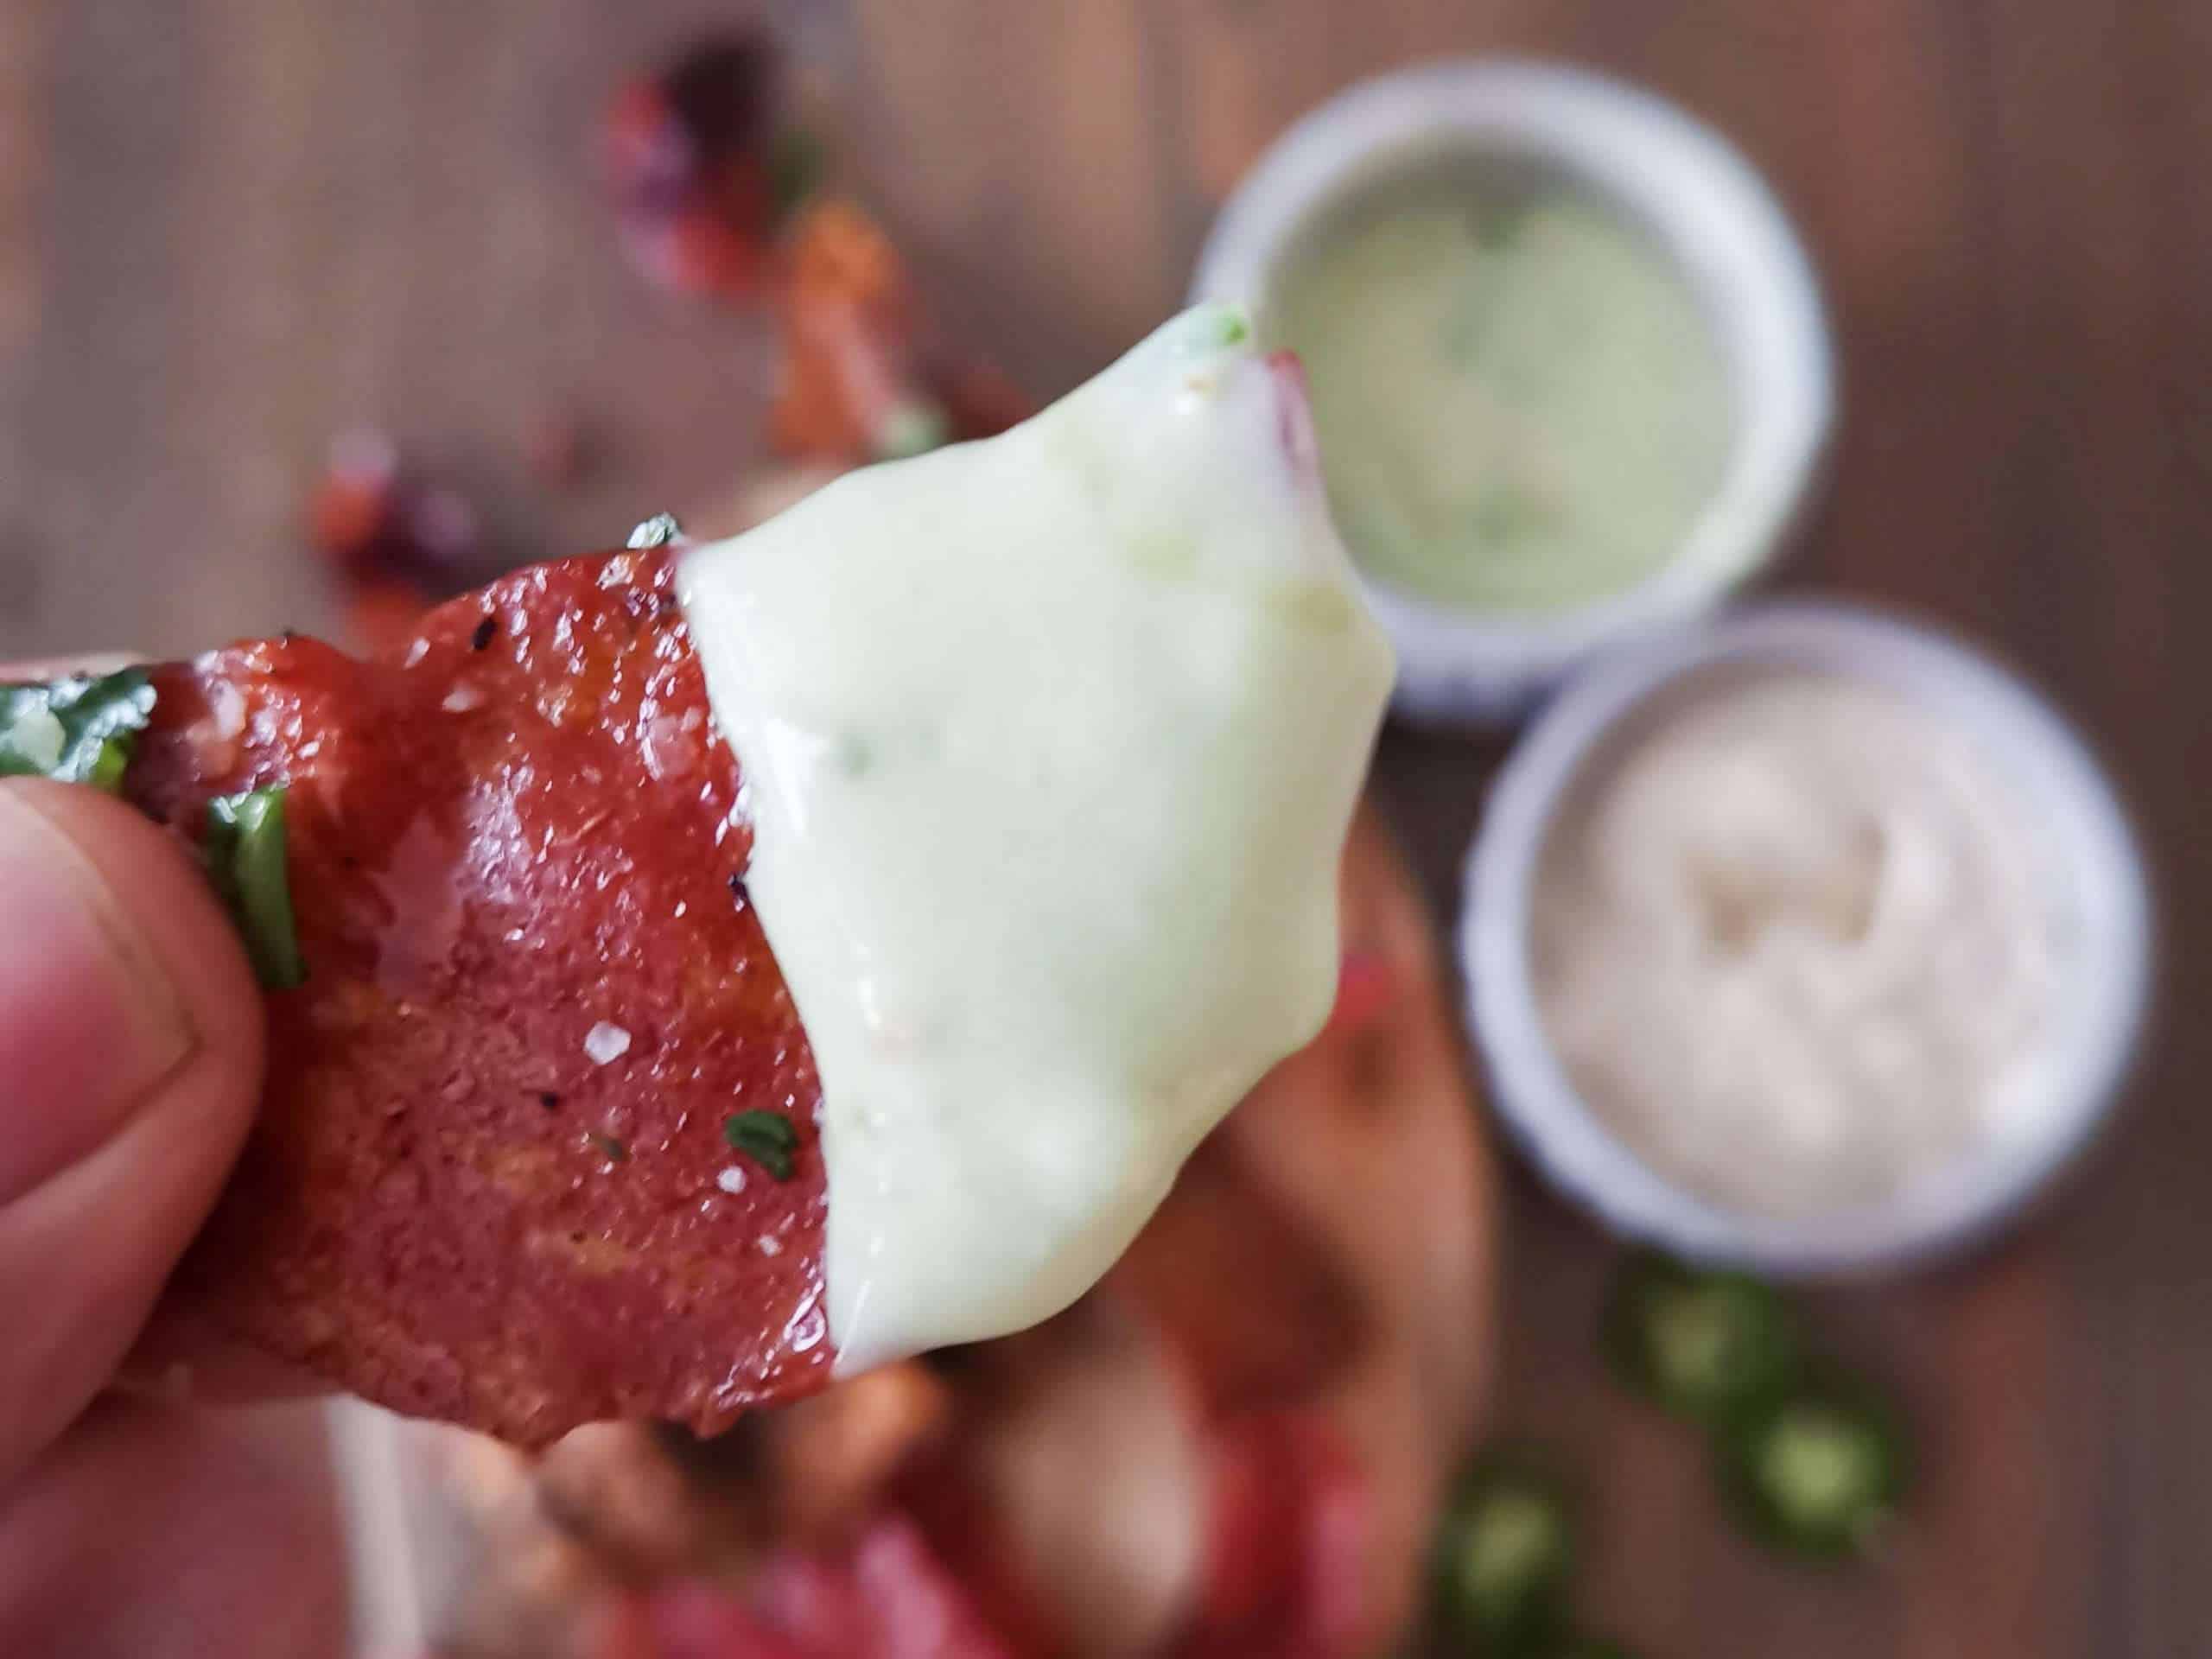 Keto friendly chips made from baked salami with dip